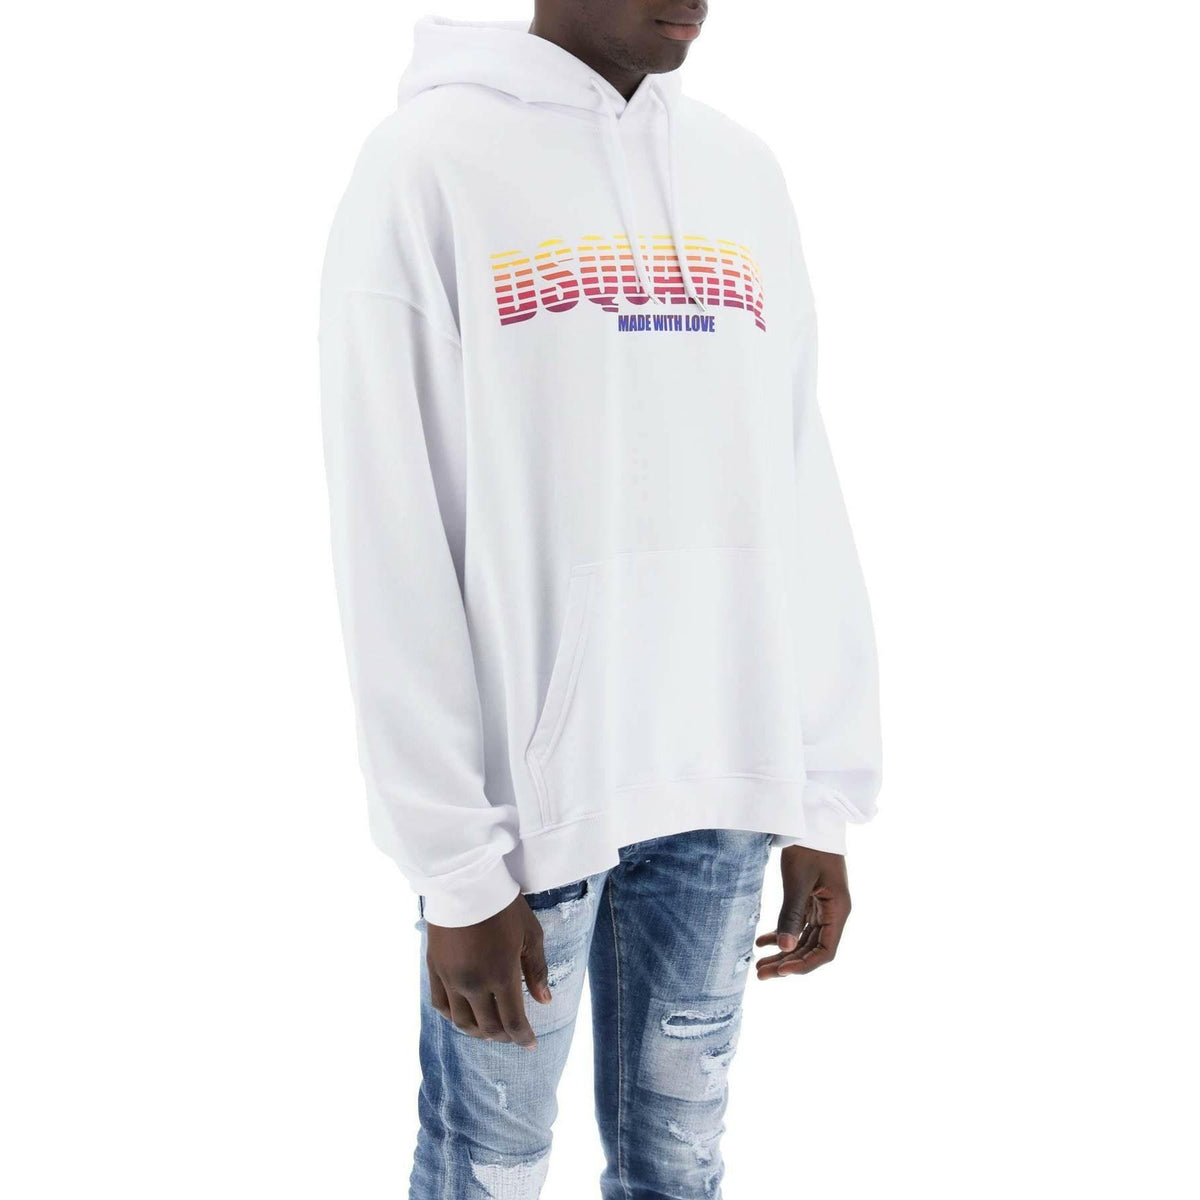 DSQUARED2 - White Loose-Fit Cotton Sweatshirt With Multicolored Graphic Lettering - JOHN JULIA